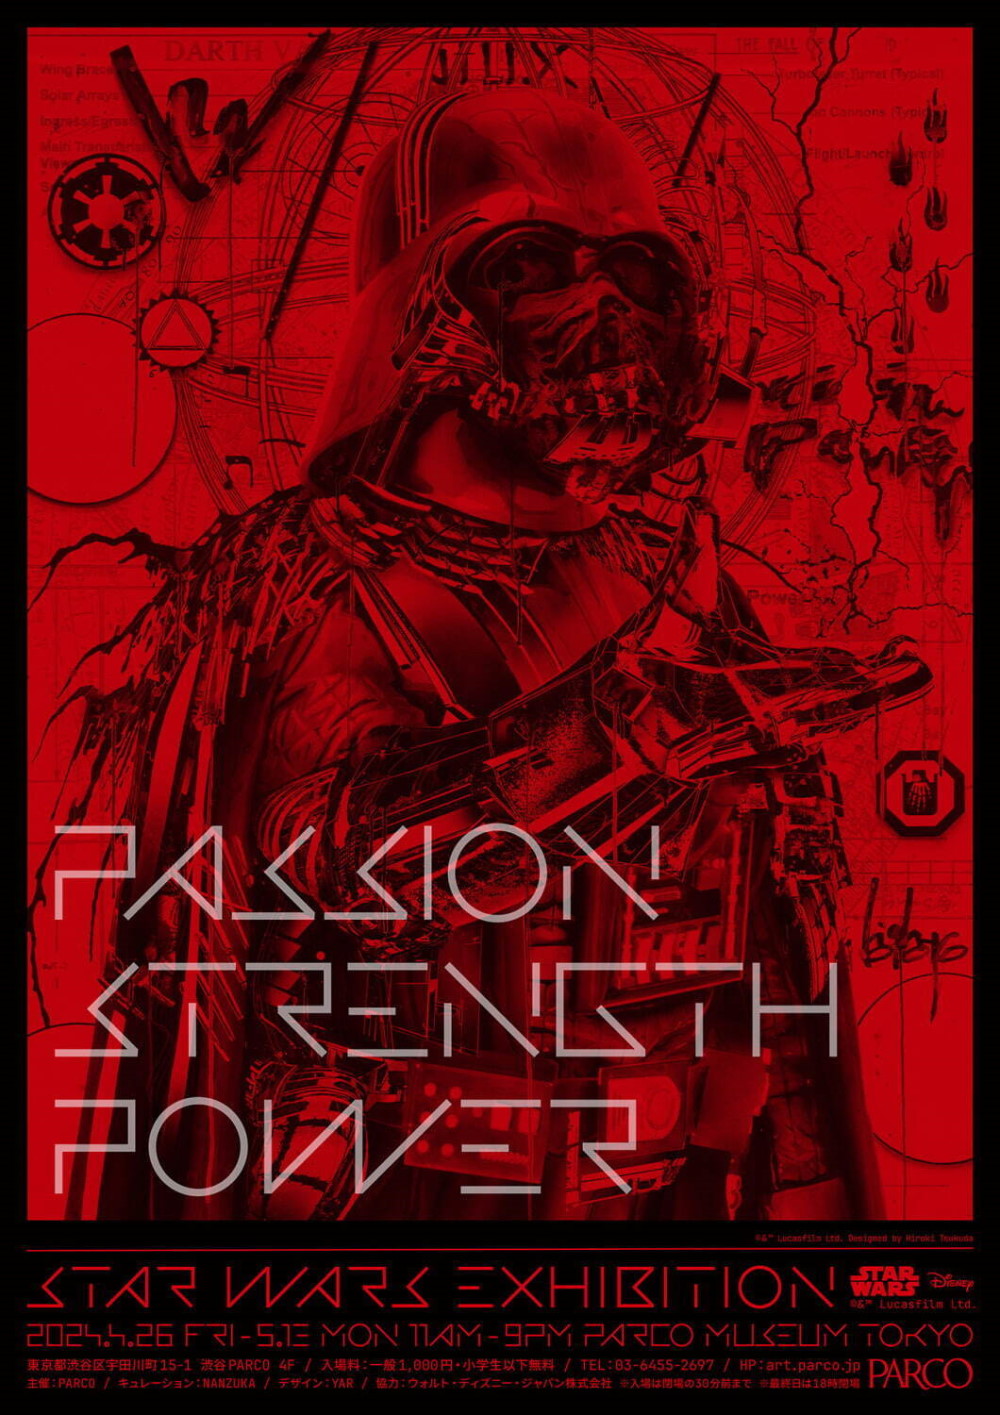 Passion, Strength, Power. Star Wars Exhibition in Giappone